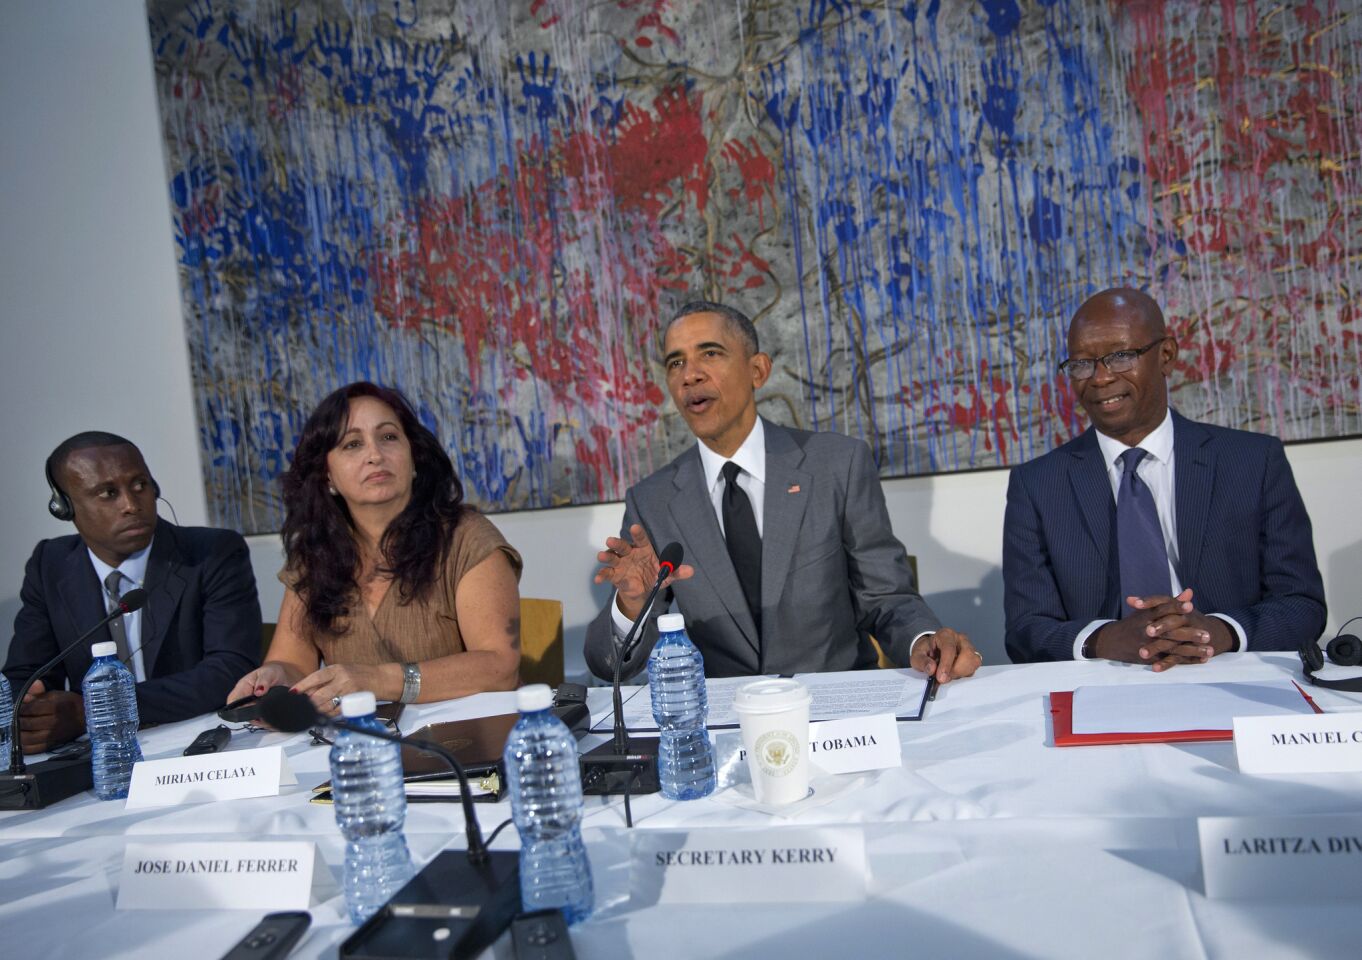 President Obama meets with dissidents and other Cubans at the U.S. Embassy in Havana. From left are Nelson Alvarez Matute, Miriam Celaya Gonzalez and Manuel Cuesta Morua.